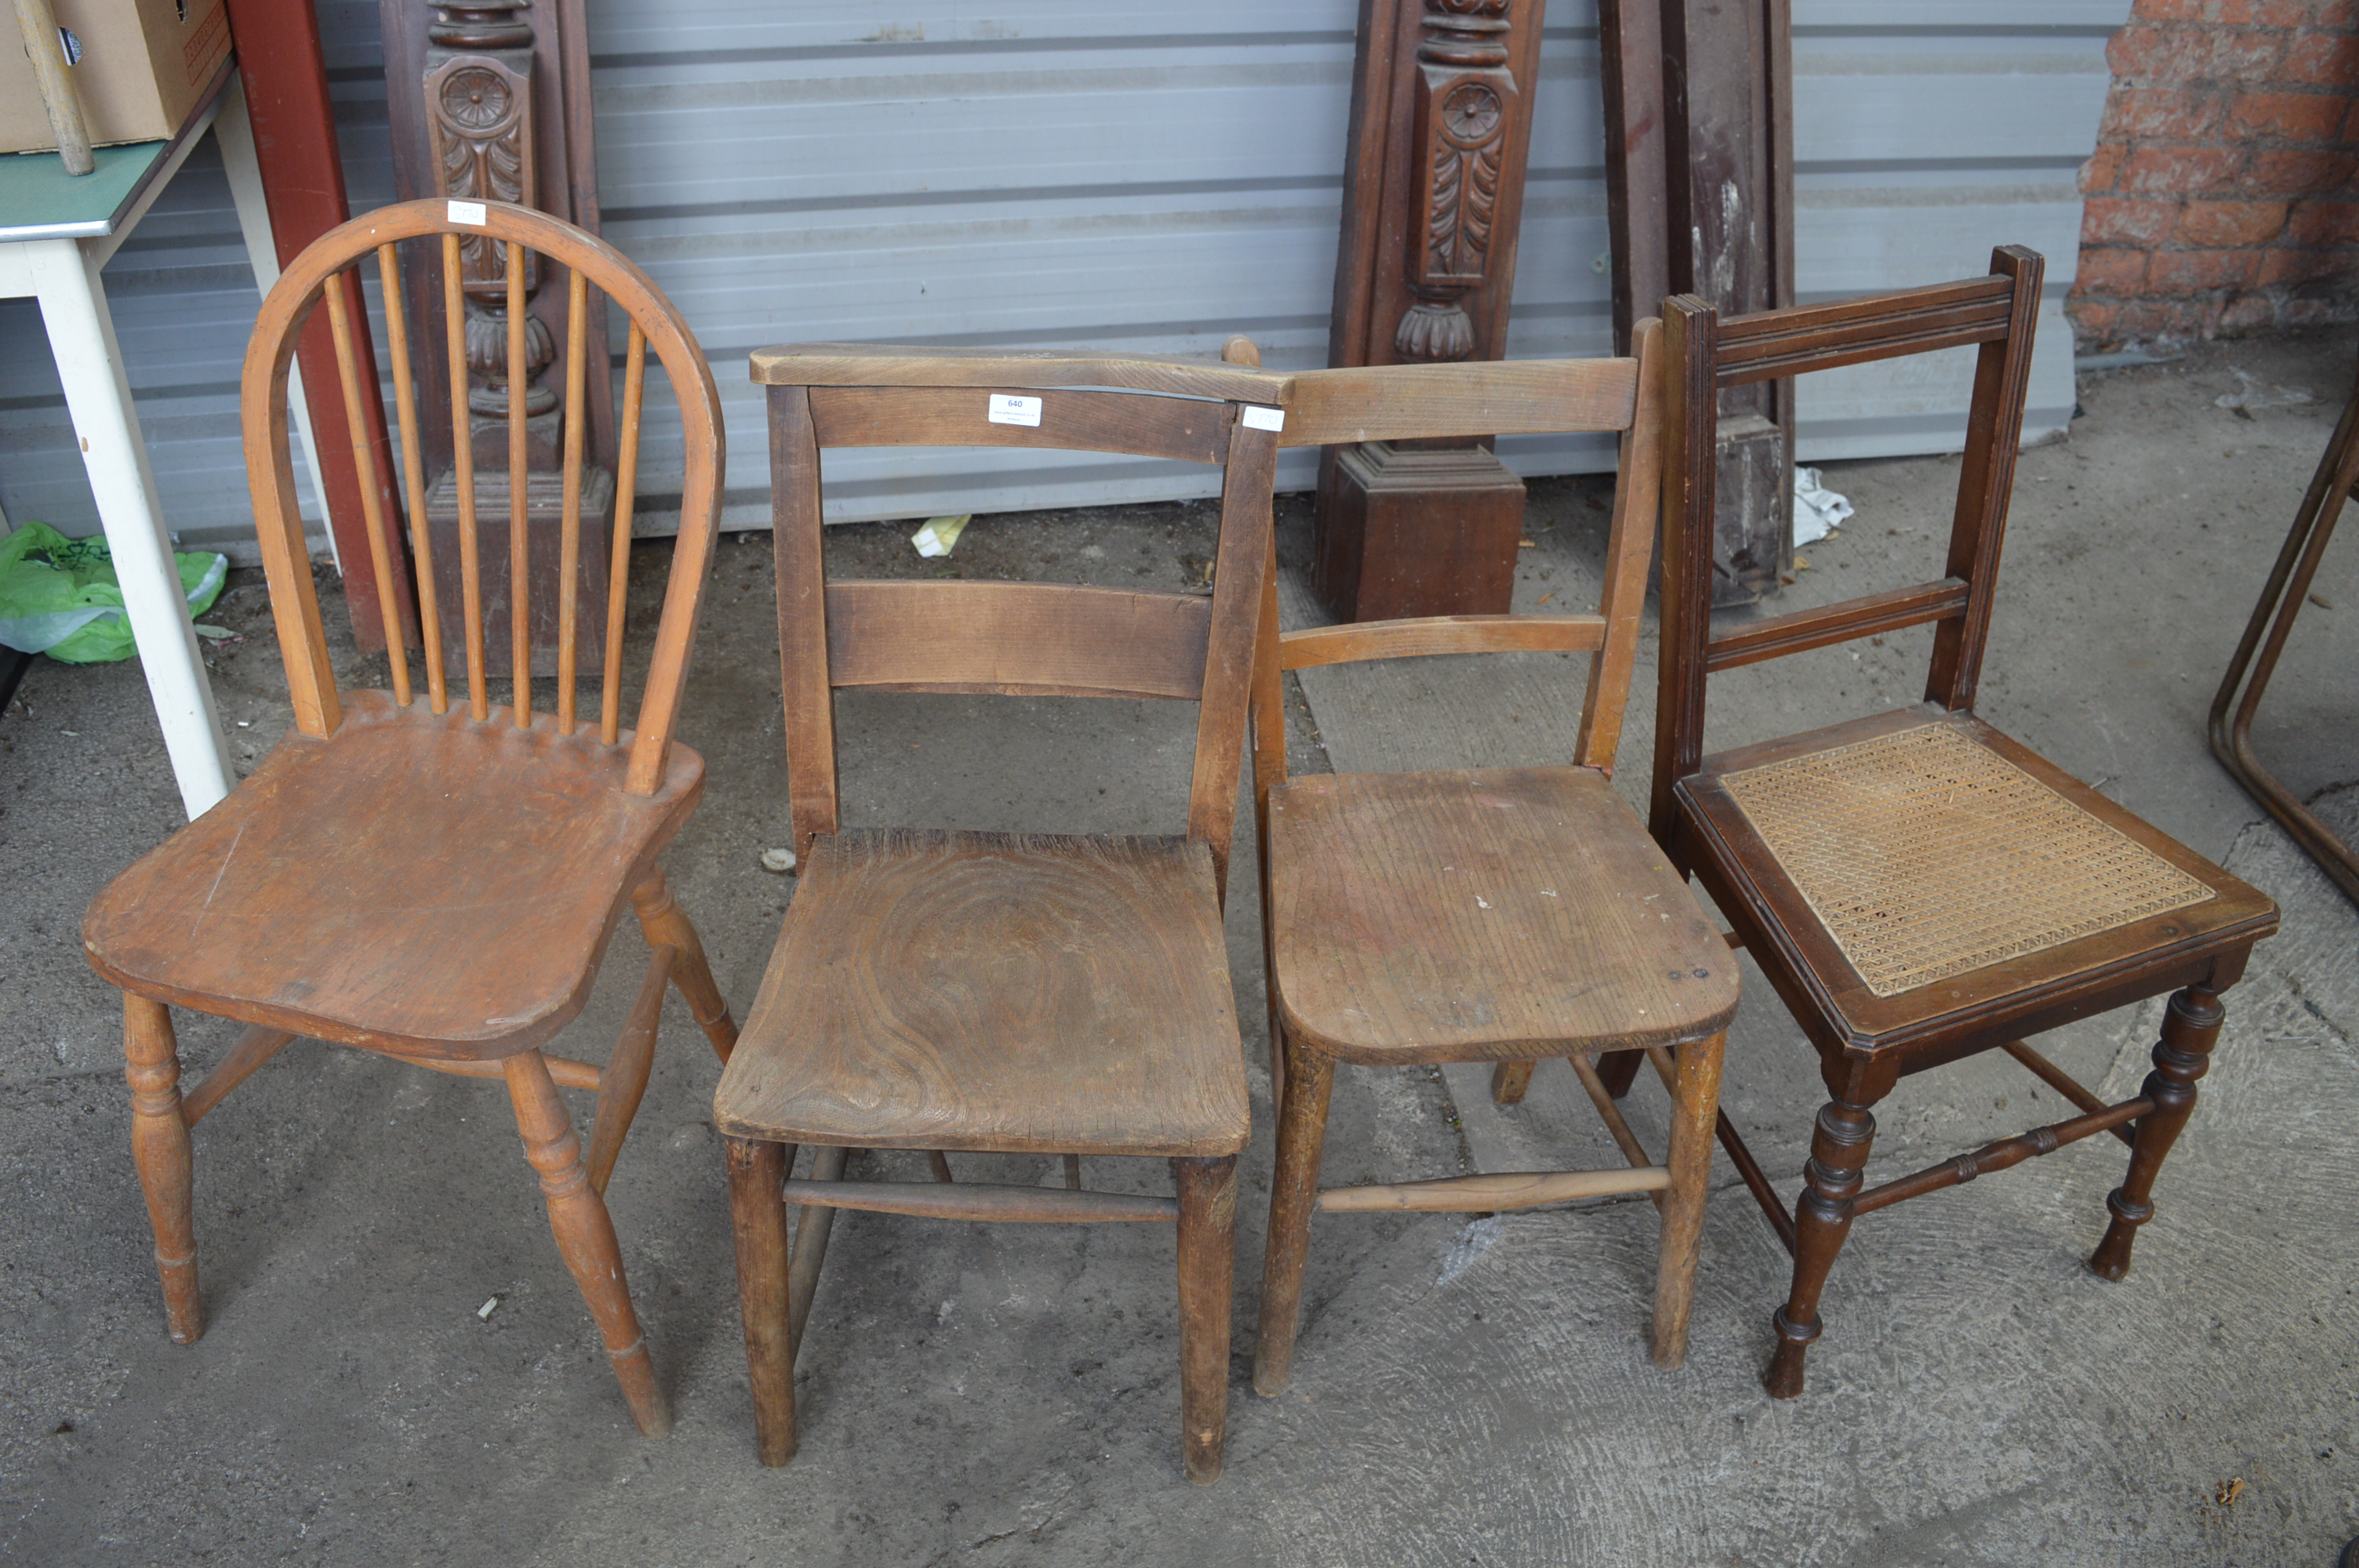 Four Period Chairs Including a School Chair